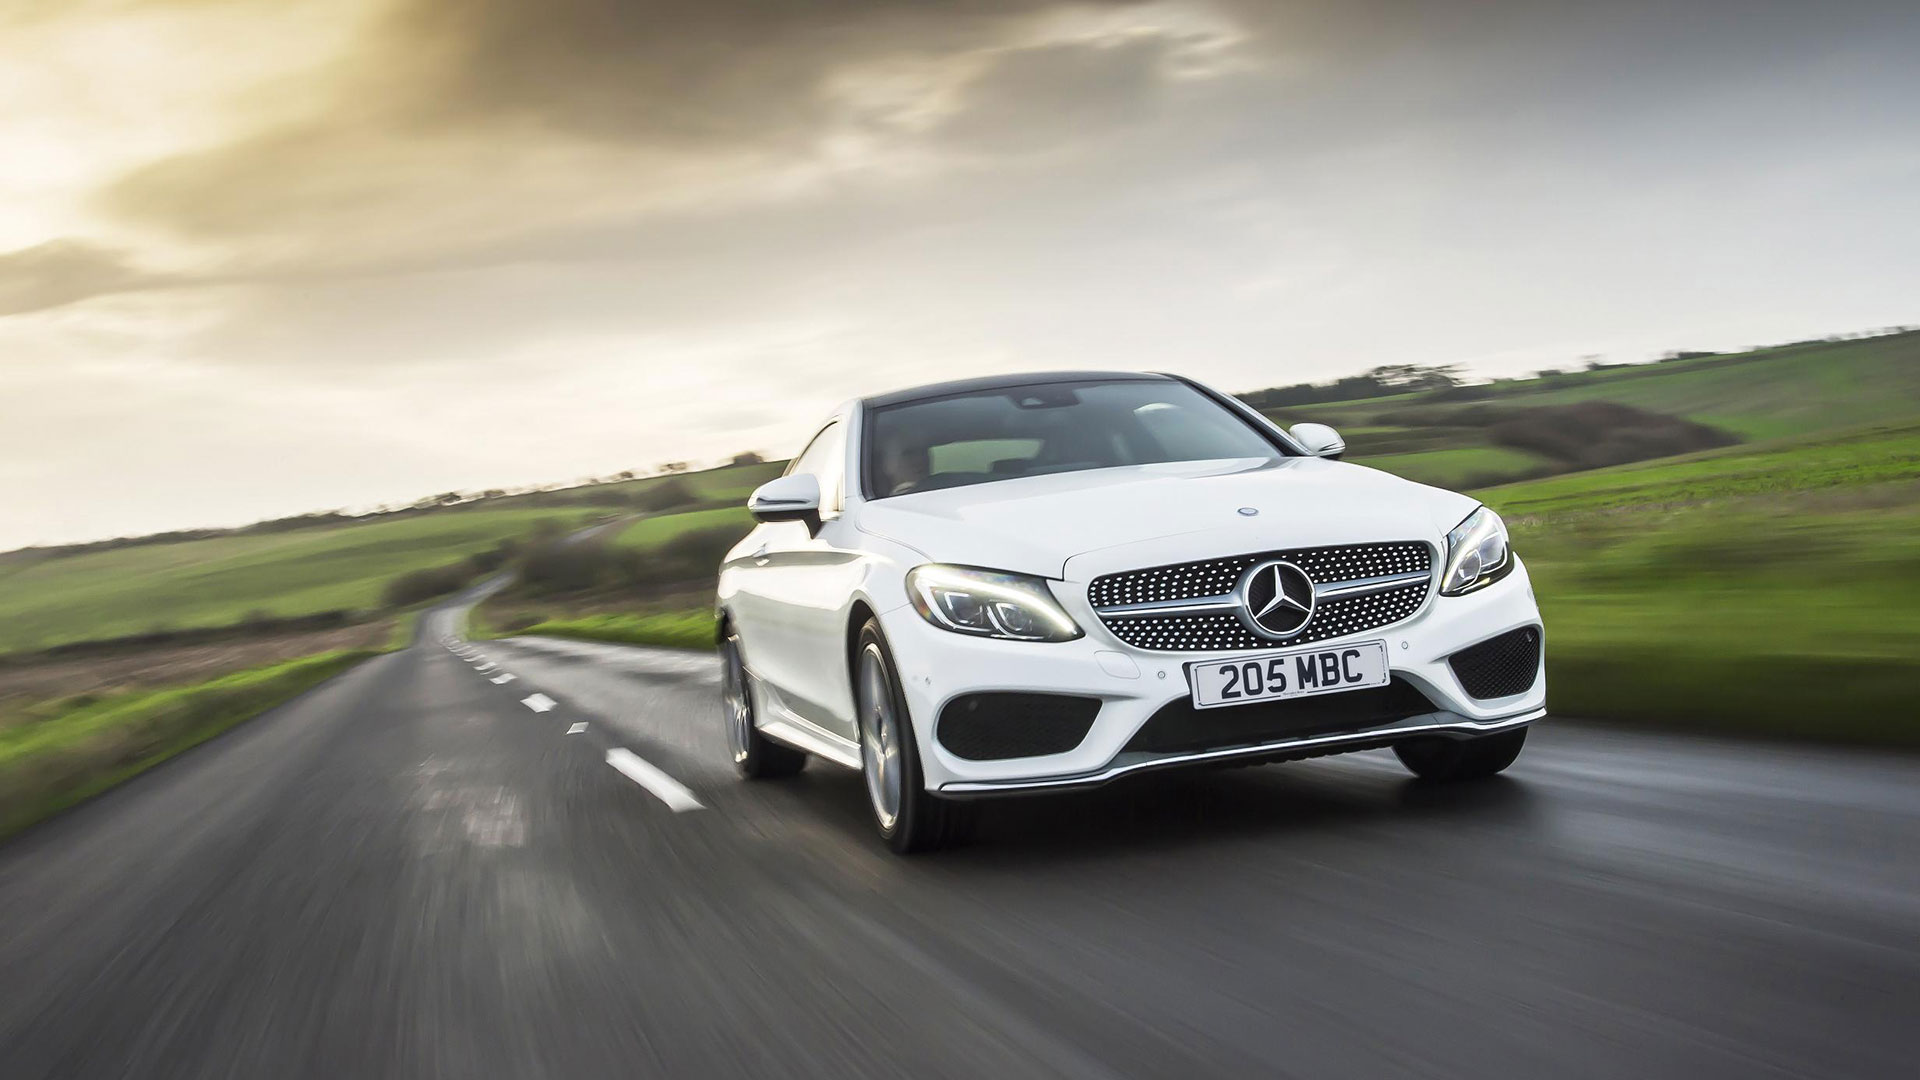 Mercedes Benz C Class Coupe 15 Review Auto Trader Uk